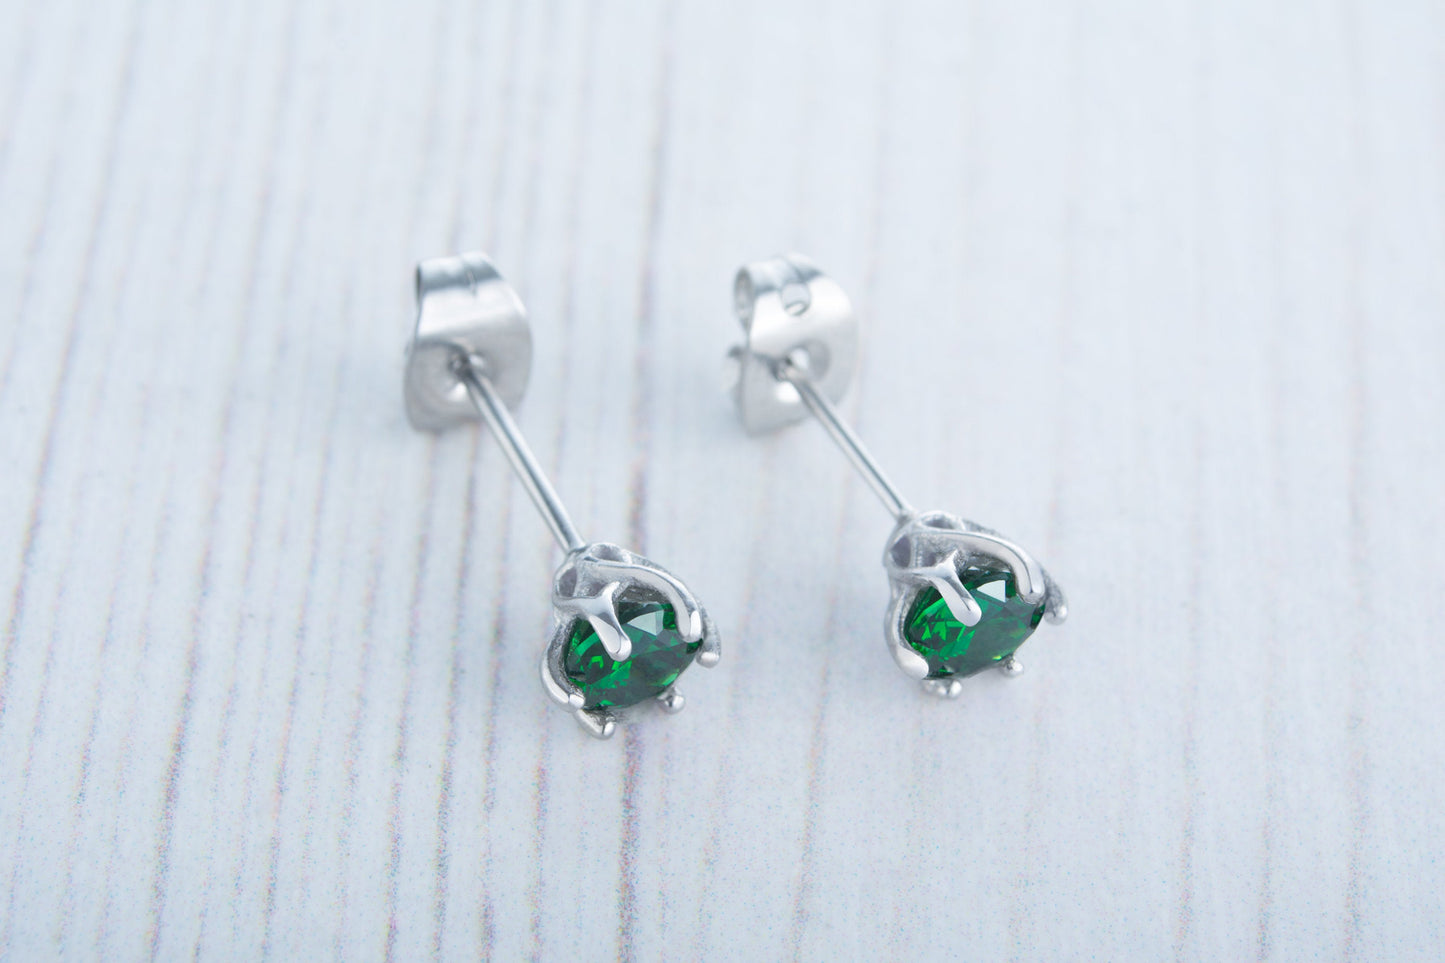 Lab emerald stud earrings, available in titanium, white gold and surgical steel 4mm, 5mm or 6mm sizes